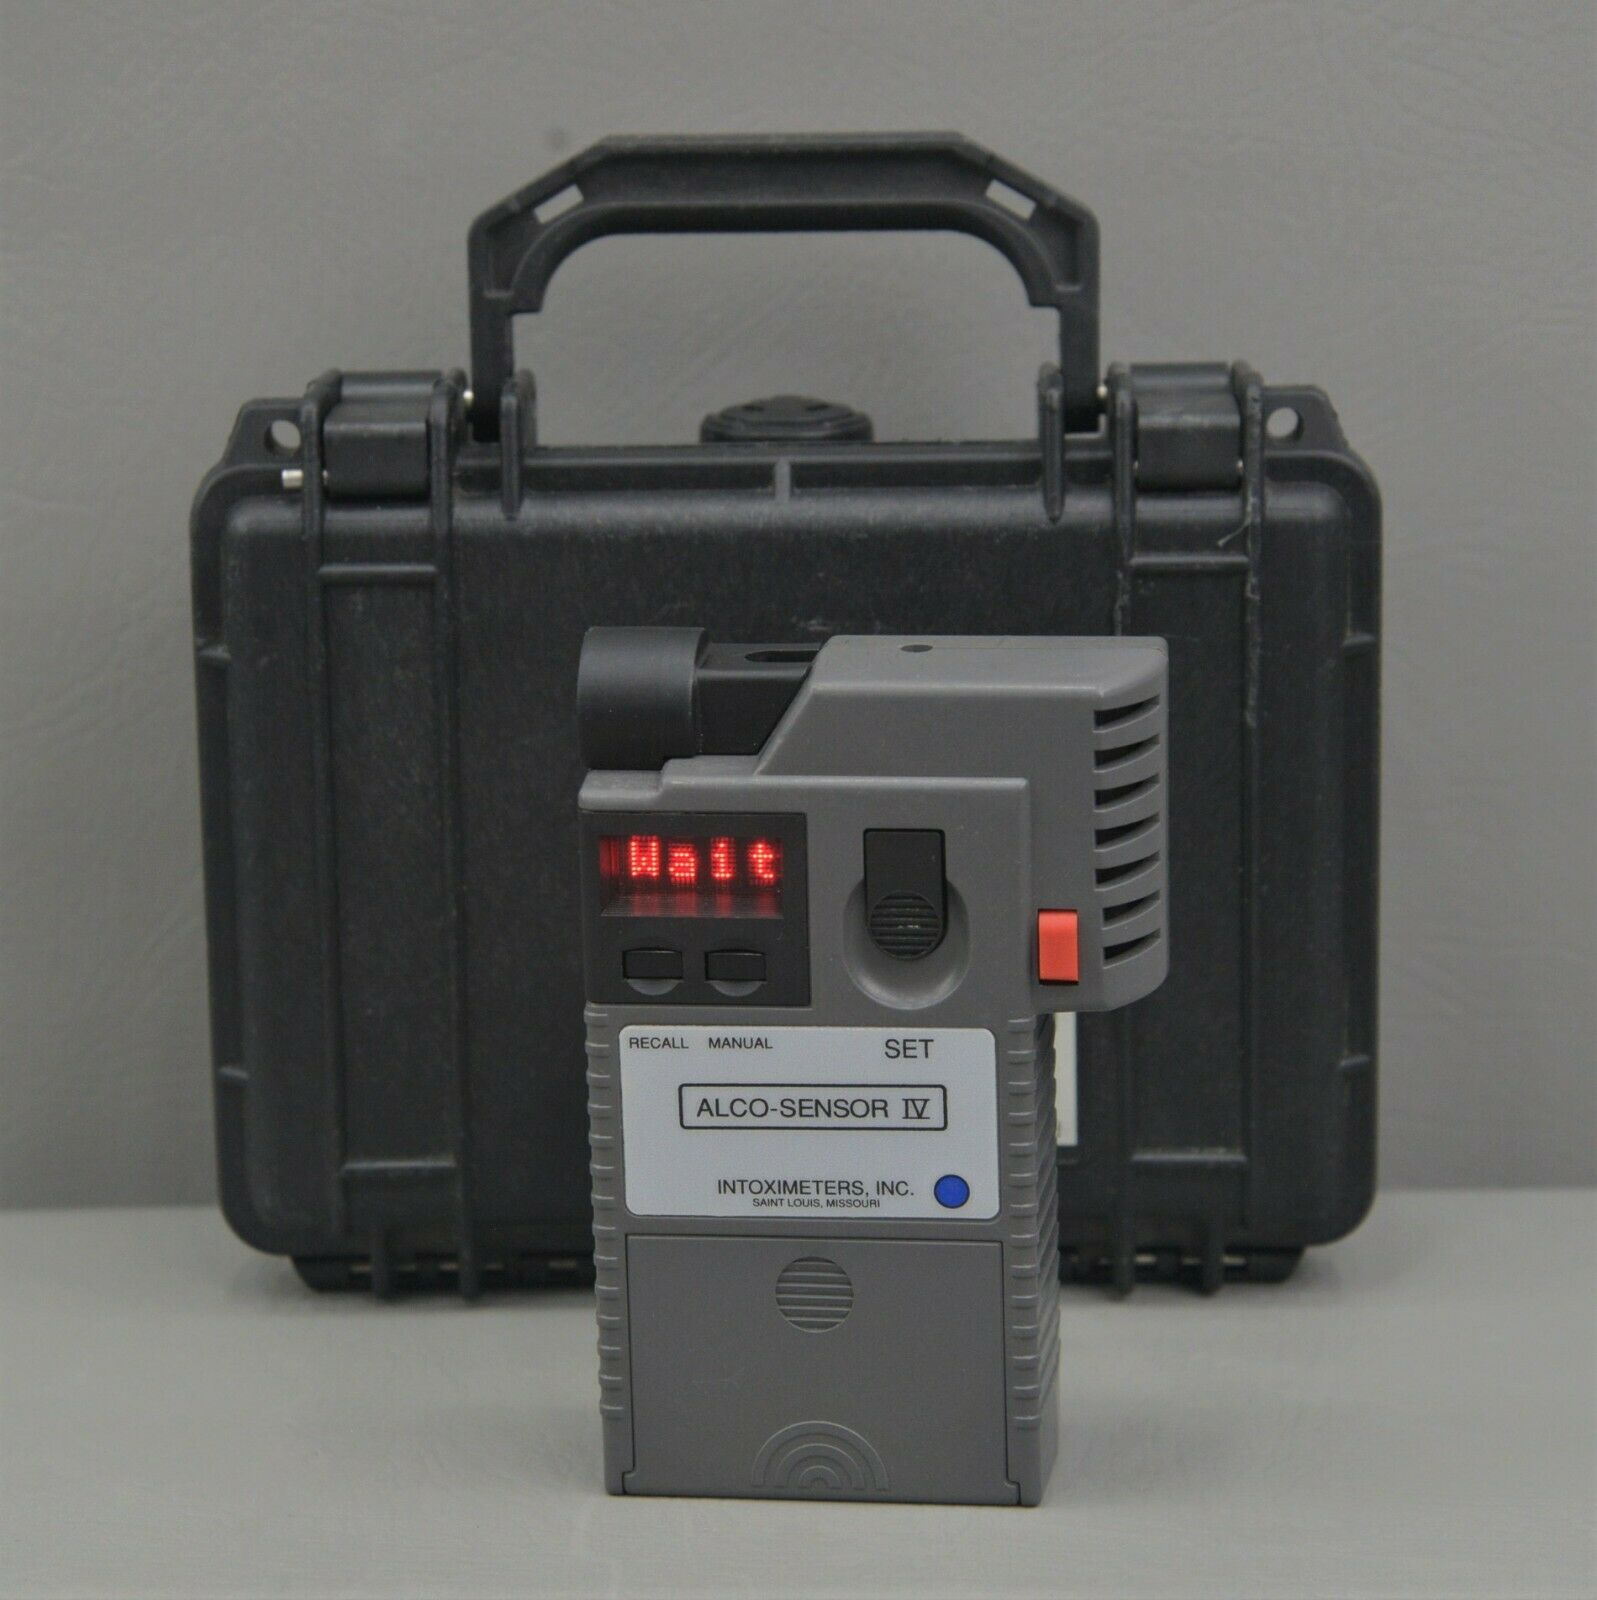 Details about   Alco-Sensor IV Intoximeter Breathalyzer BAC Alcohol Meter With Case 